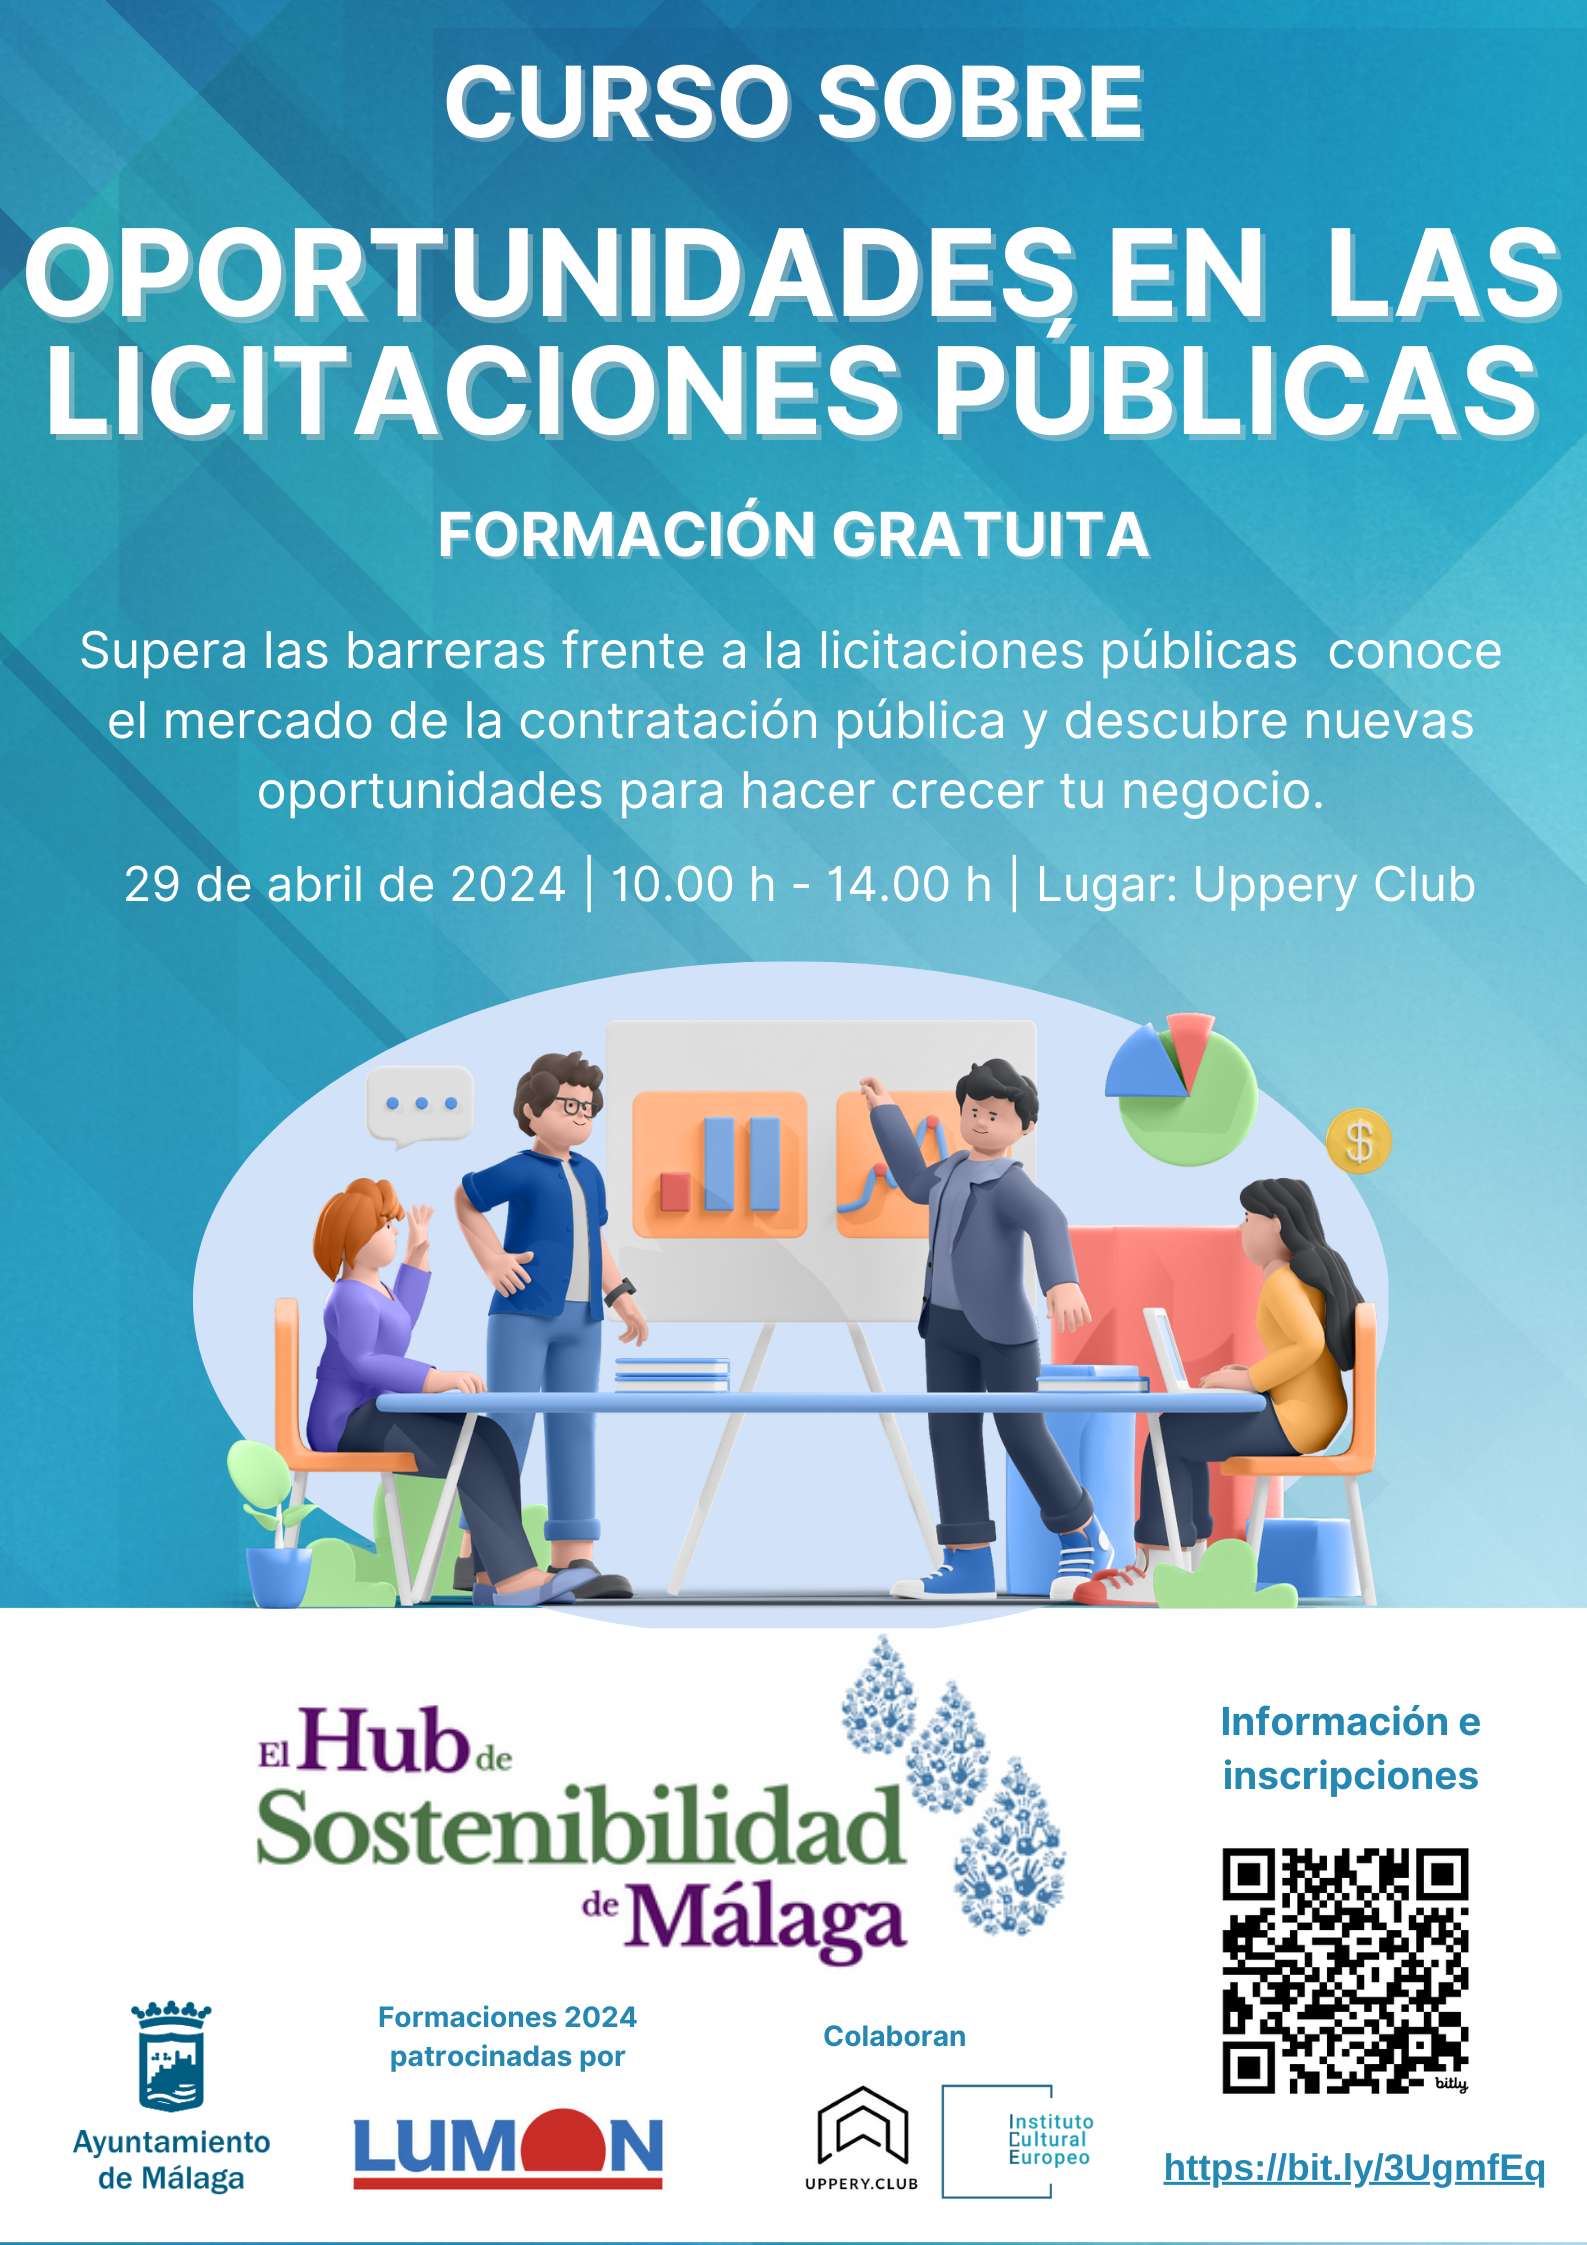 Free course in Malaga on the opportunities of public tenders in your company